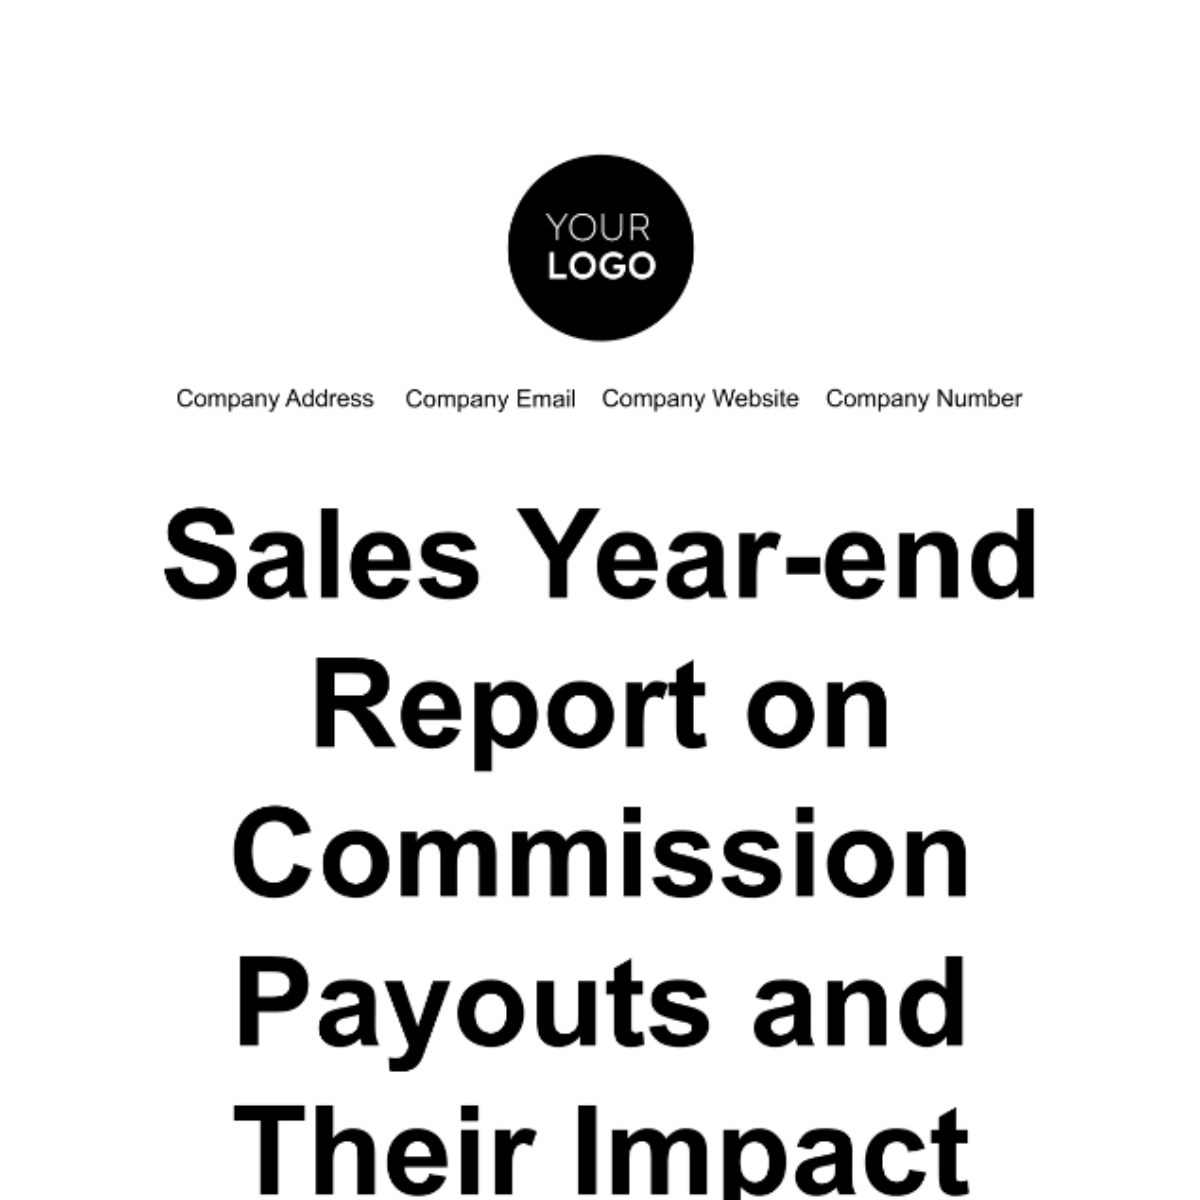 Free Sales Year-end Report on Commission Payouts and Their Impact on Profitability Template